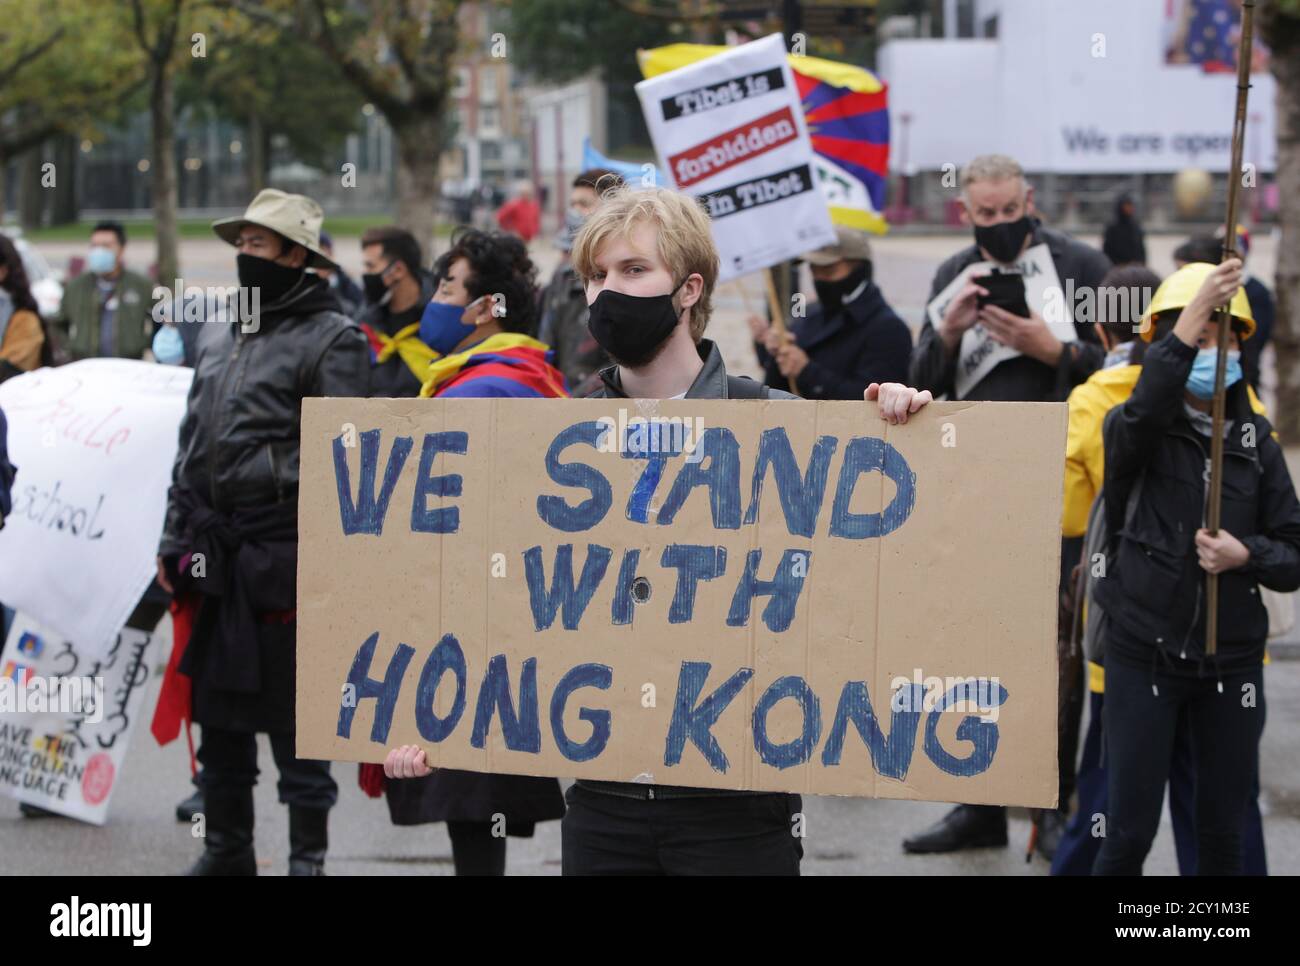 Amsterdam, Netherlands. 01st Oct, 2020. Activists Pro-Democracy in Chine take part during protest hold a placar ‘We Stand With Hong Kong' at the Museumplein amid the Coronavirus pandemic on October 1, 2020 in Amsterdam, Netherlands. Activists and supporters Pro-Democracy protest against human rights violations in Chine, Hong Kong and Tibet demand the end of state violence against people. (Photo by Paulo Amorim/Sipa USA) Credit: Sipa USA/Alamy Live News Stock Photo